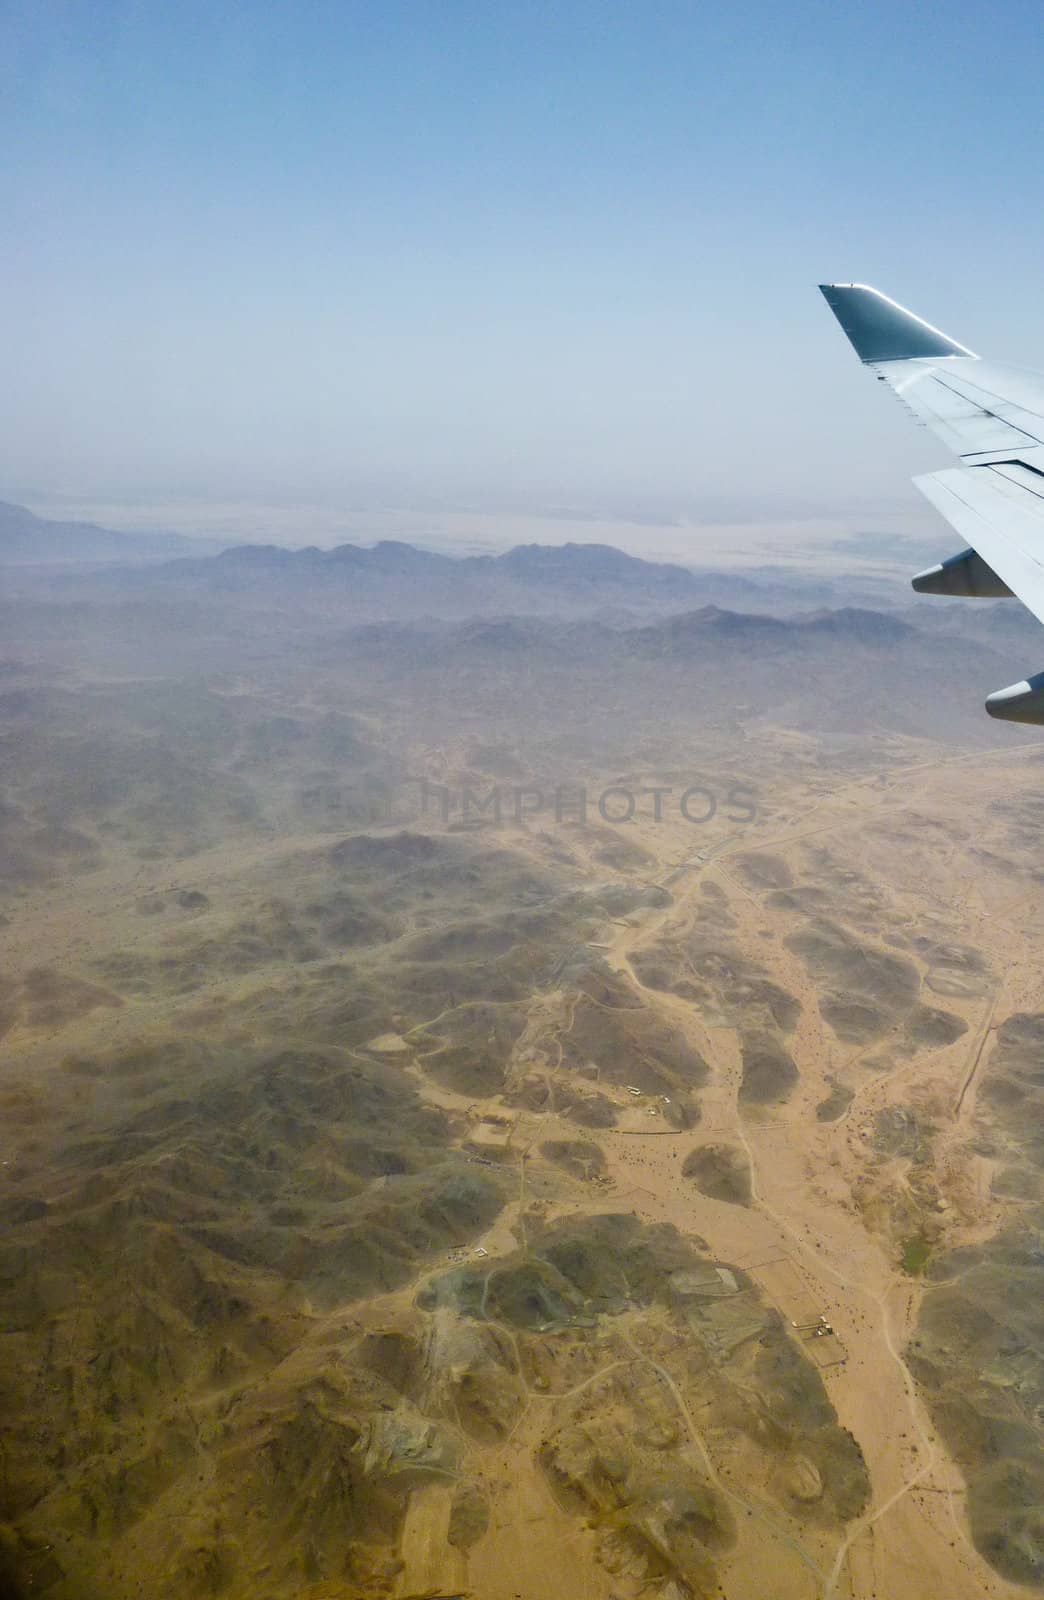 an aerial view of a highland in the desert some where over Arab region